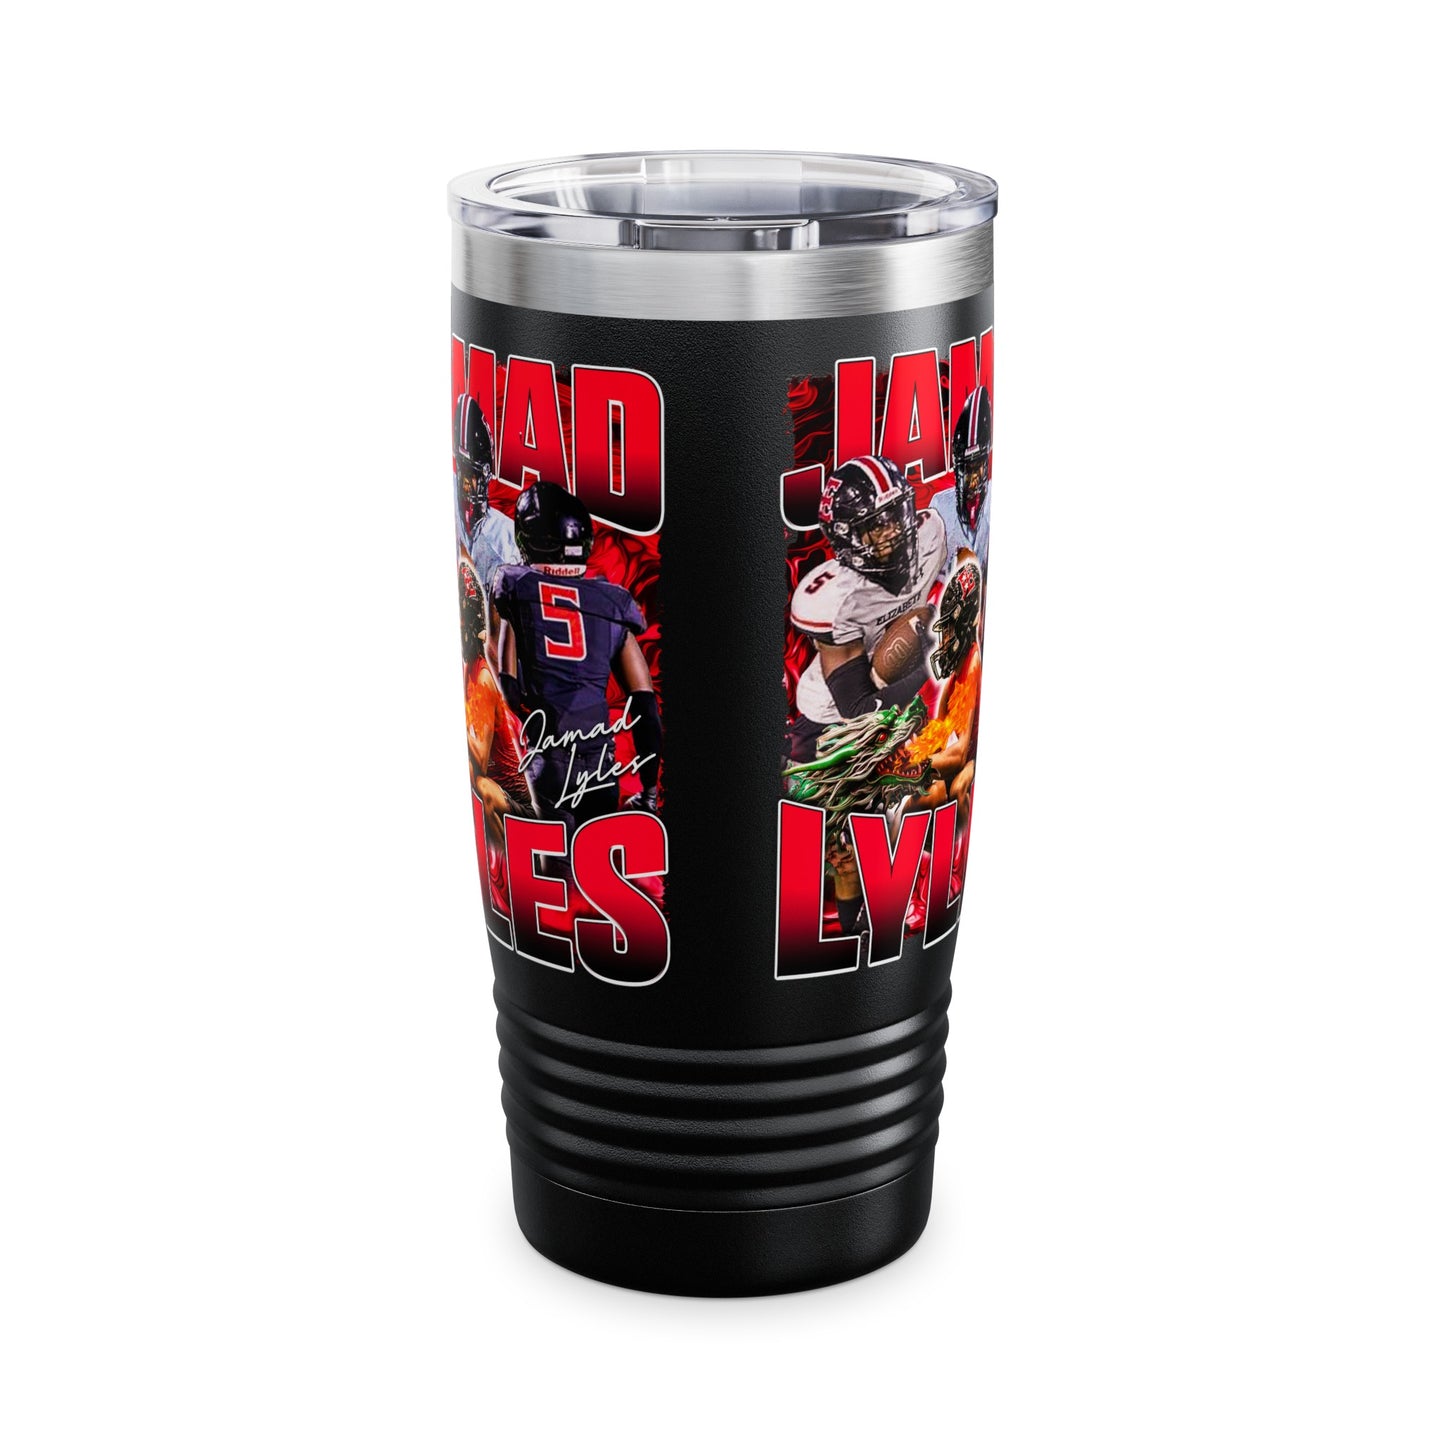 Jamad Lyles Stainless Steal Tumbler